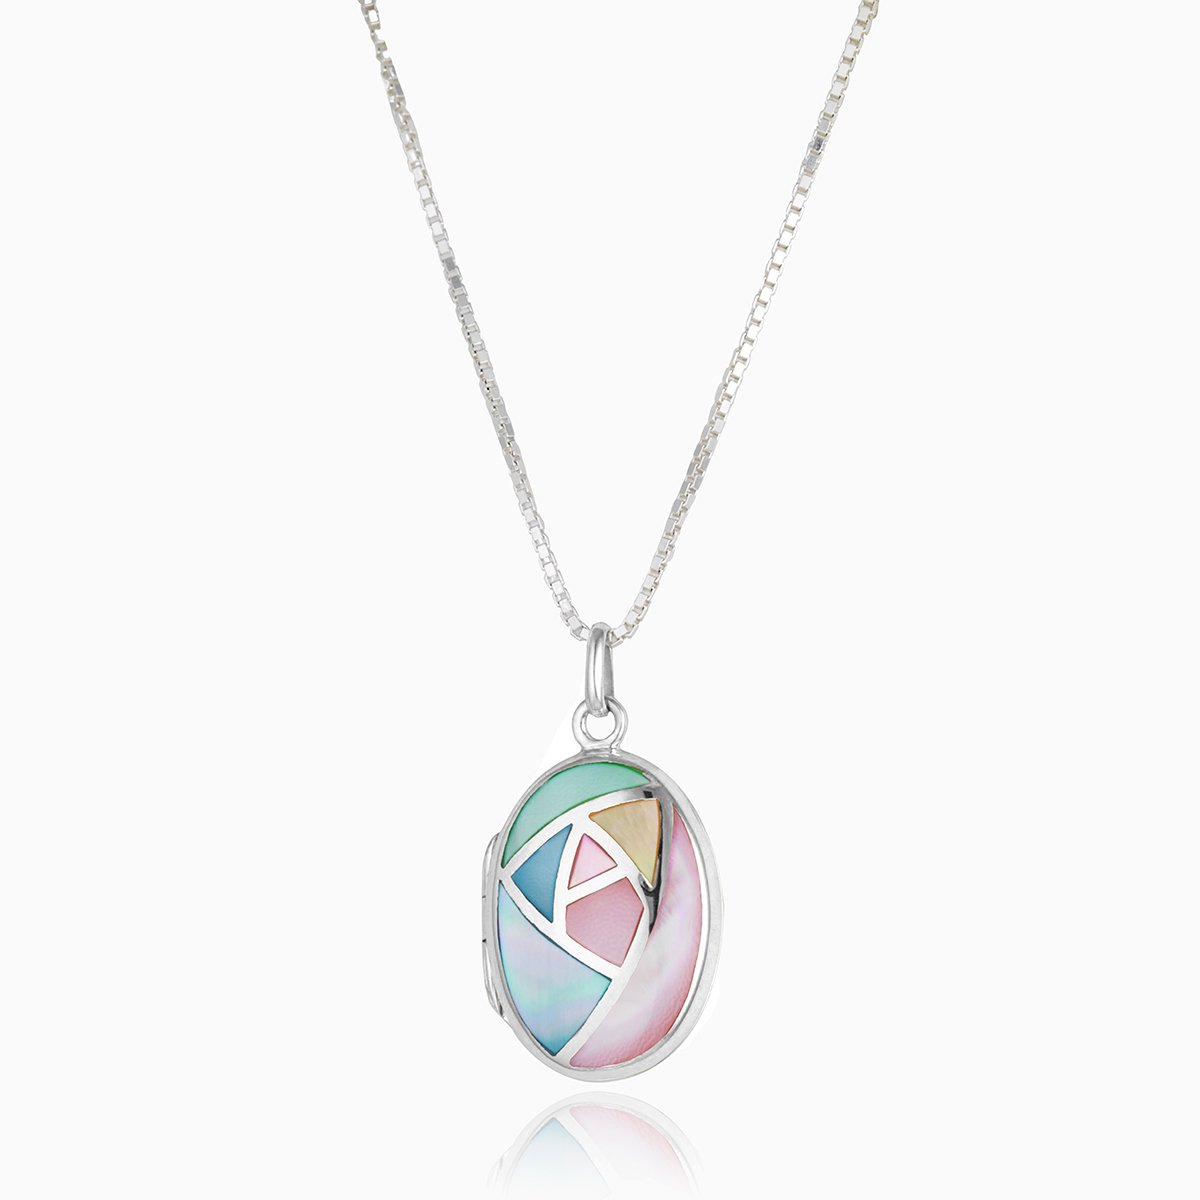 Product title: Mother of Pearl Sterling Silver Oval Locket, product type: Locket